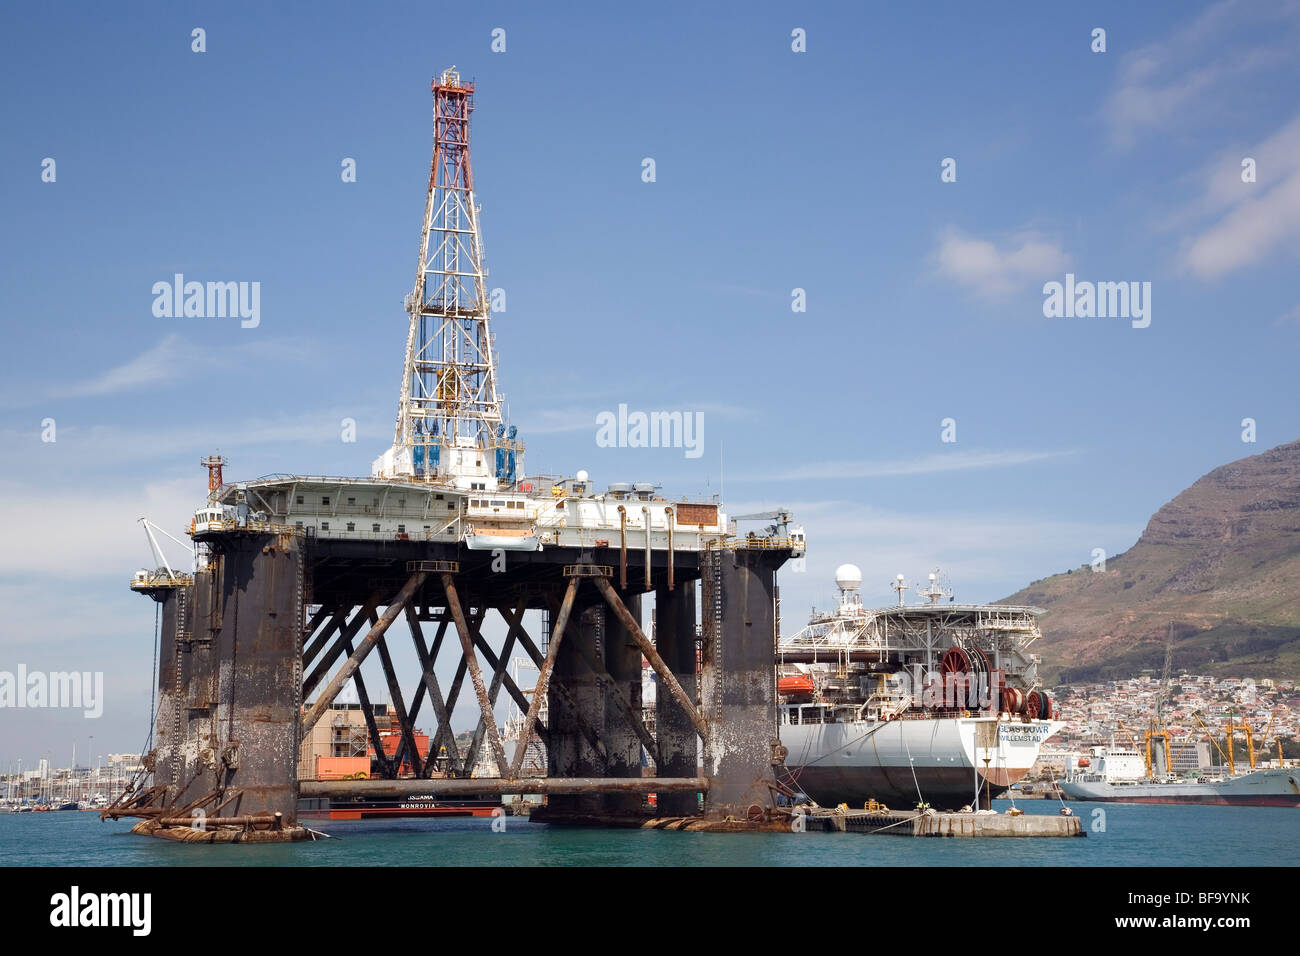 Oil Rig and search/ drillship alongside - Cape Town Stock Photo